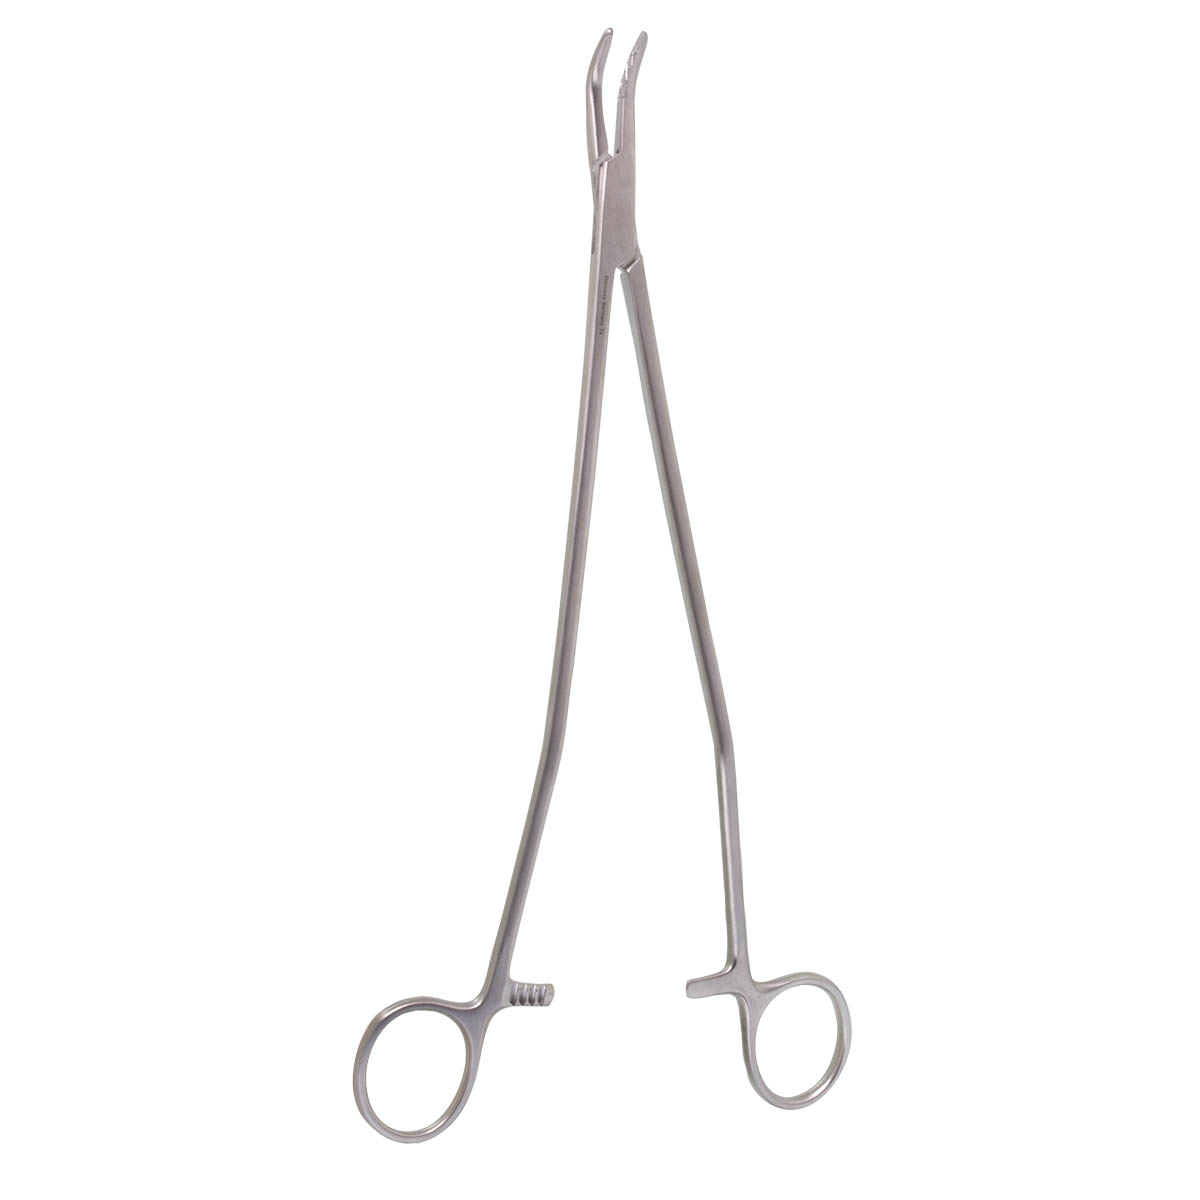 10 double Needle Instruments Surgical Holder BOSS - cv 1/2\